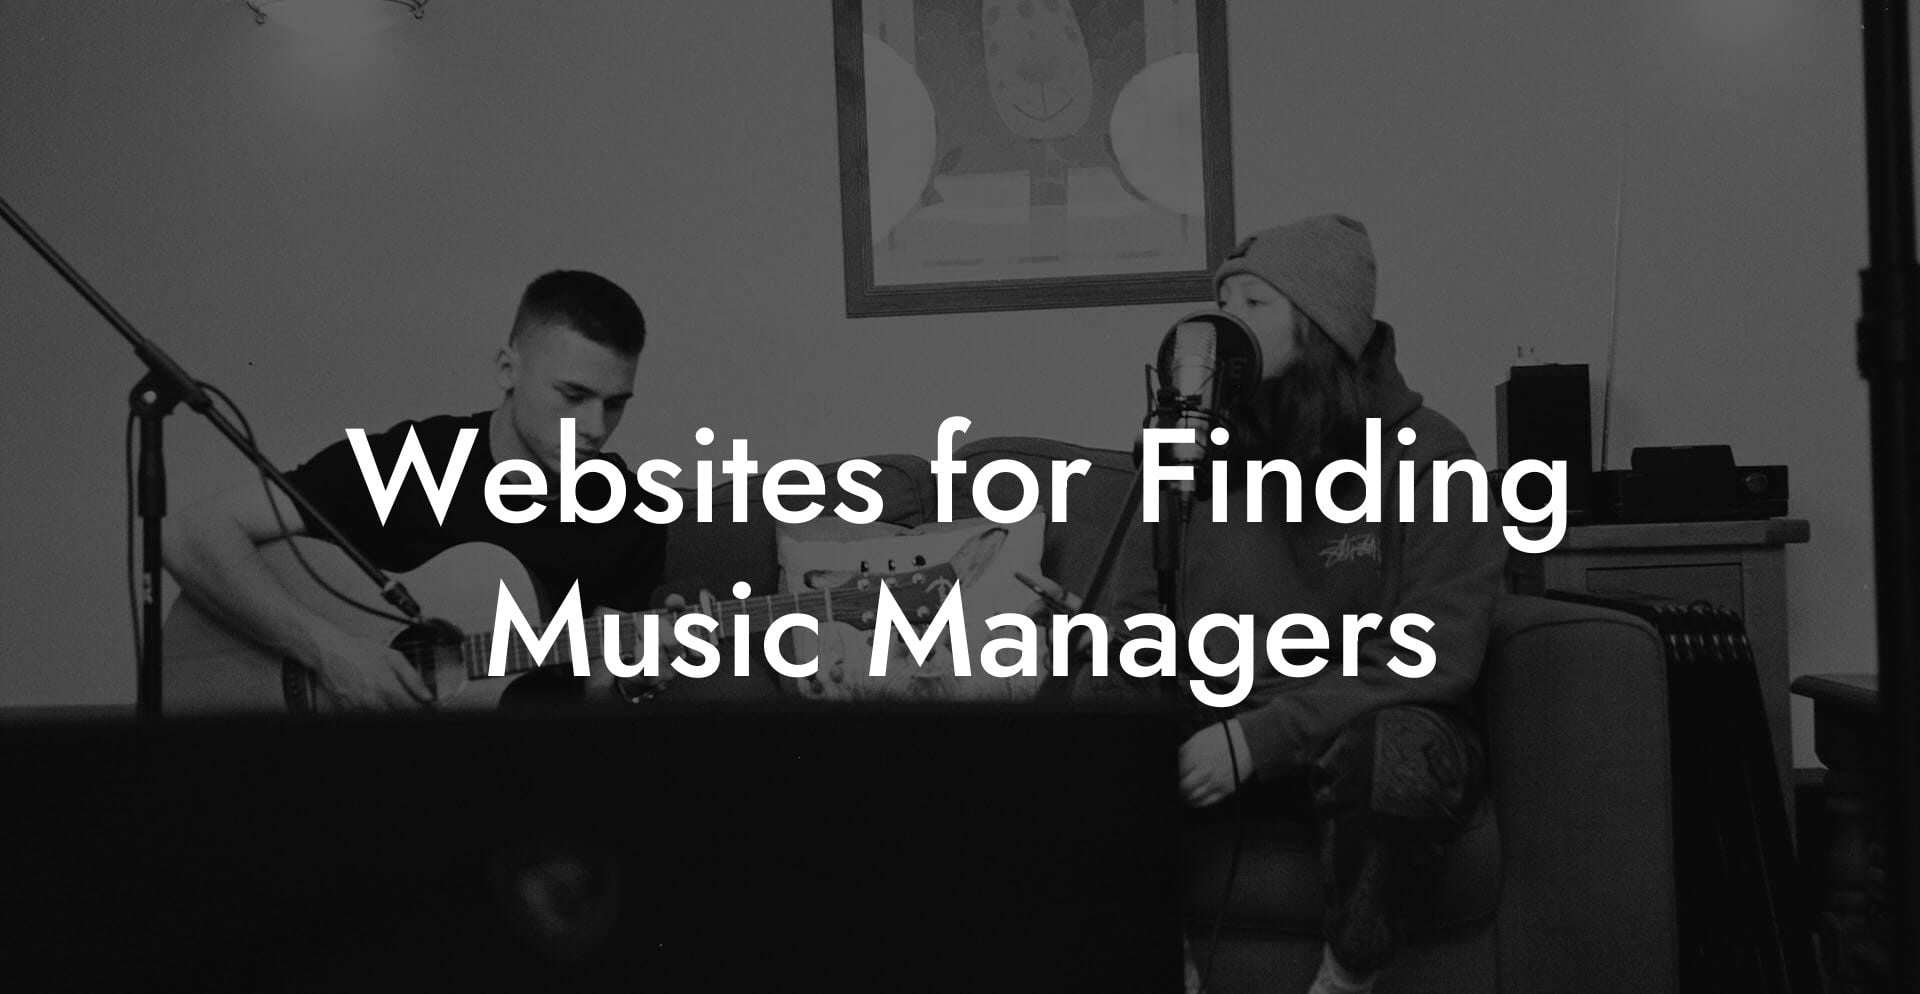 Websites for Finding Music Managers